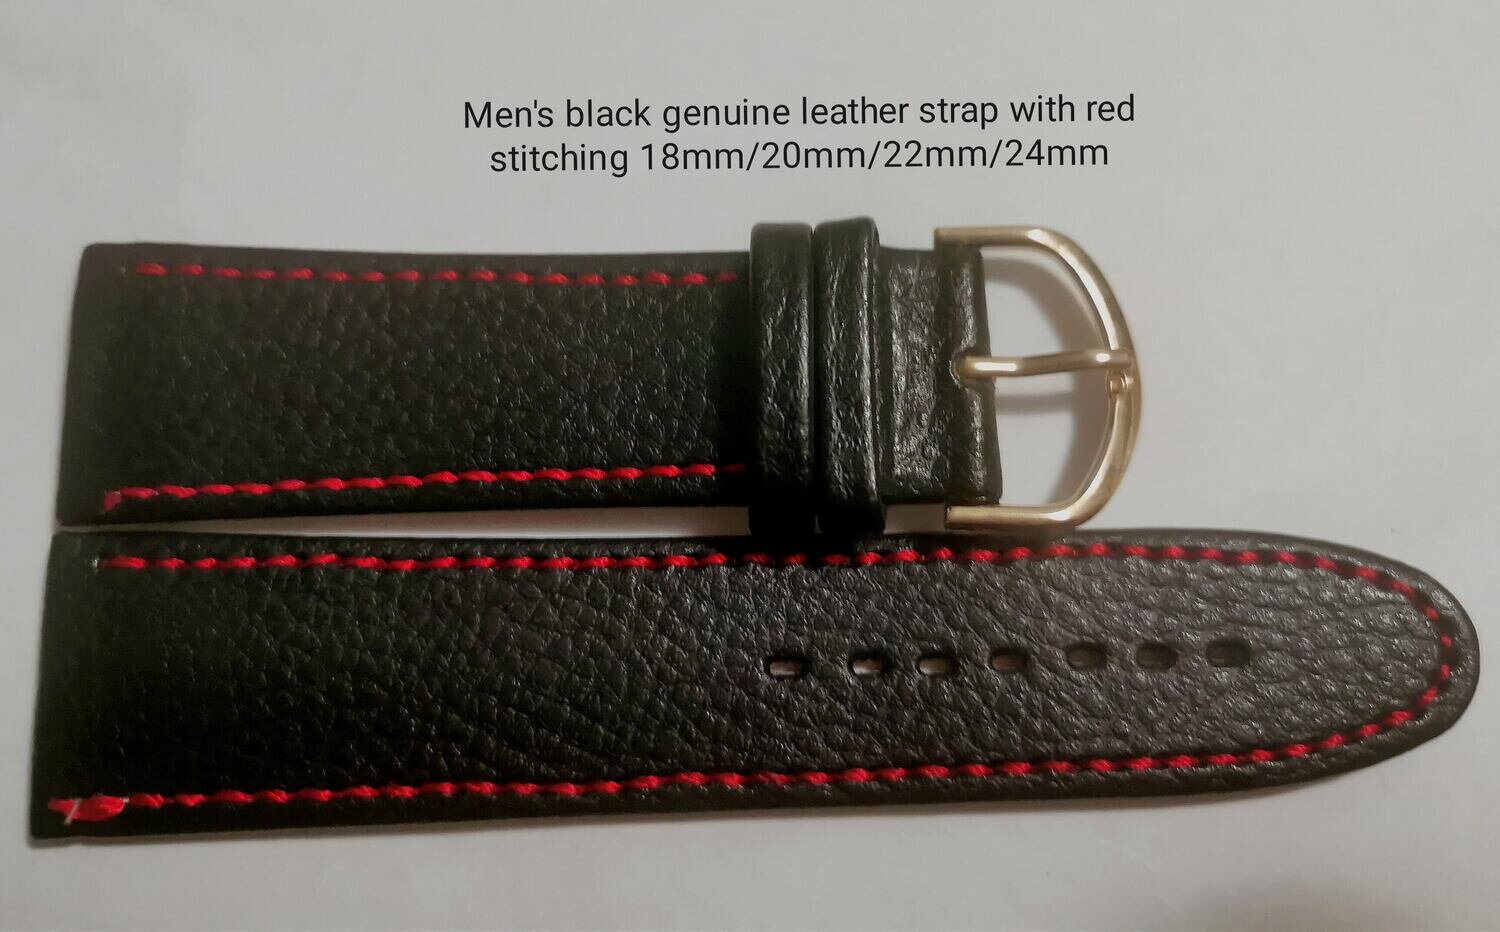 Men's black genuine leather strap with red stitching 18mm/20mm/22mm/24mm